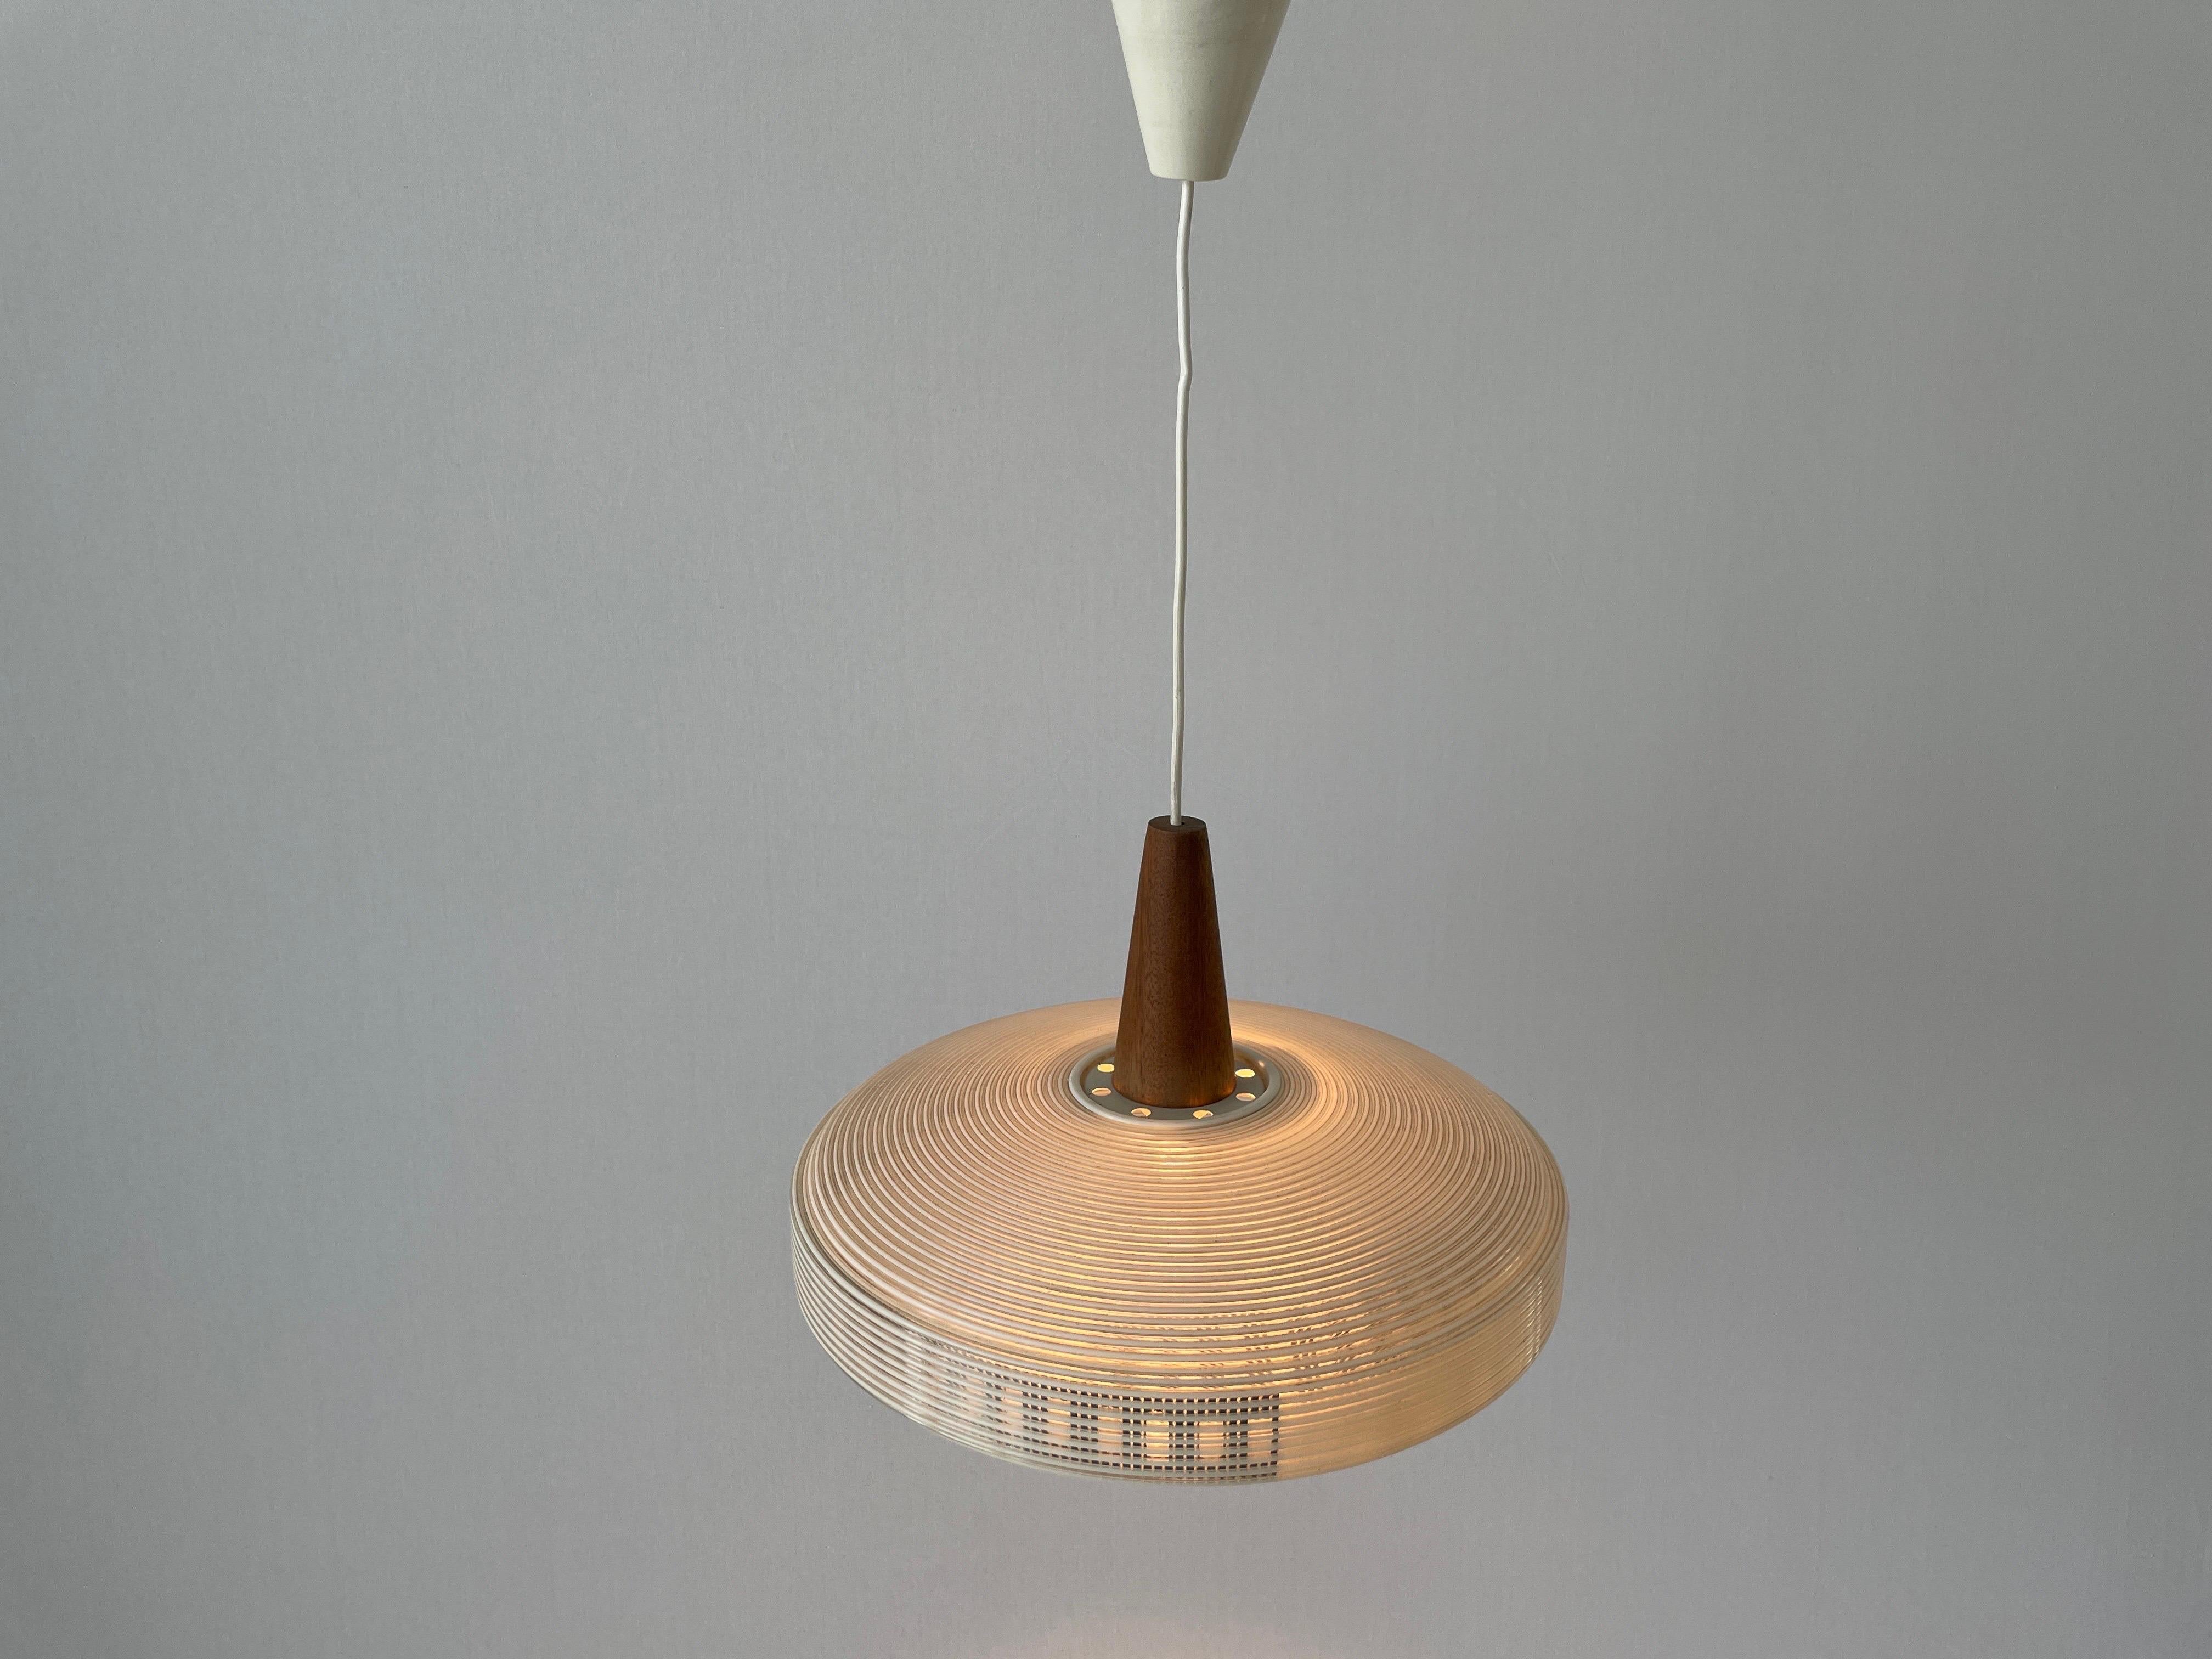 Rare Rotaflex Ceiling Lamp by Yasha Heifetz with Teak Detail, 1960s Germany For Sale 4